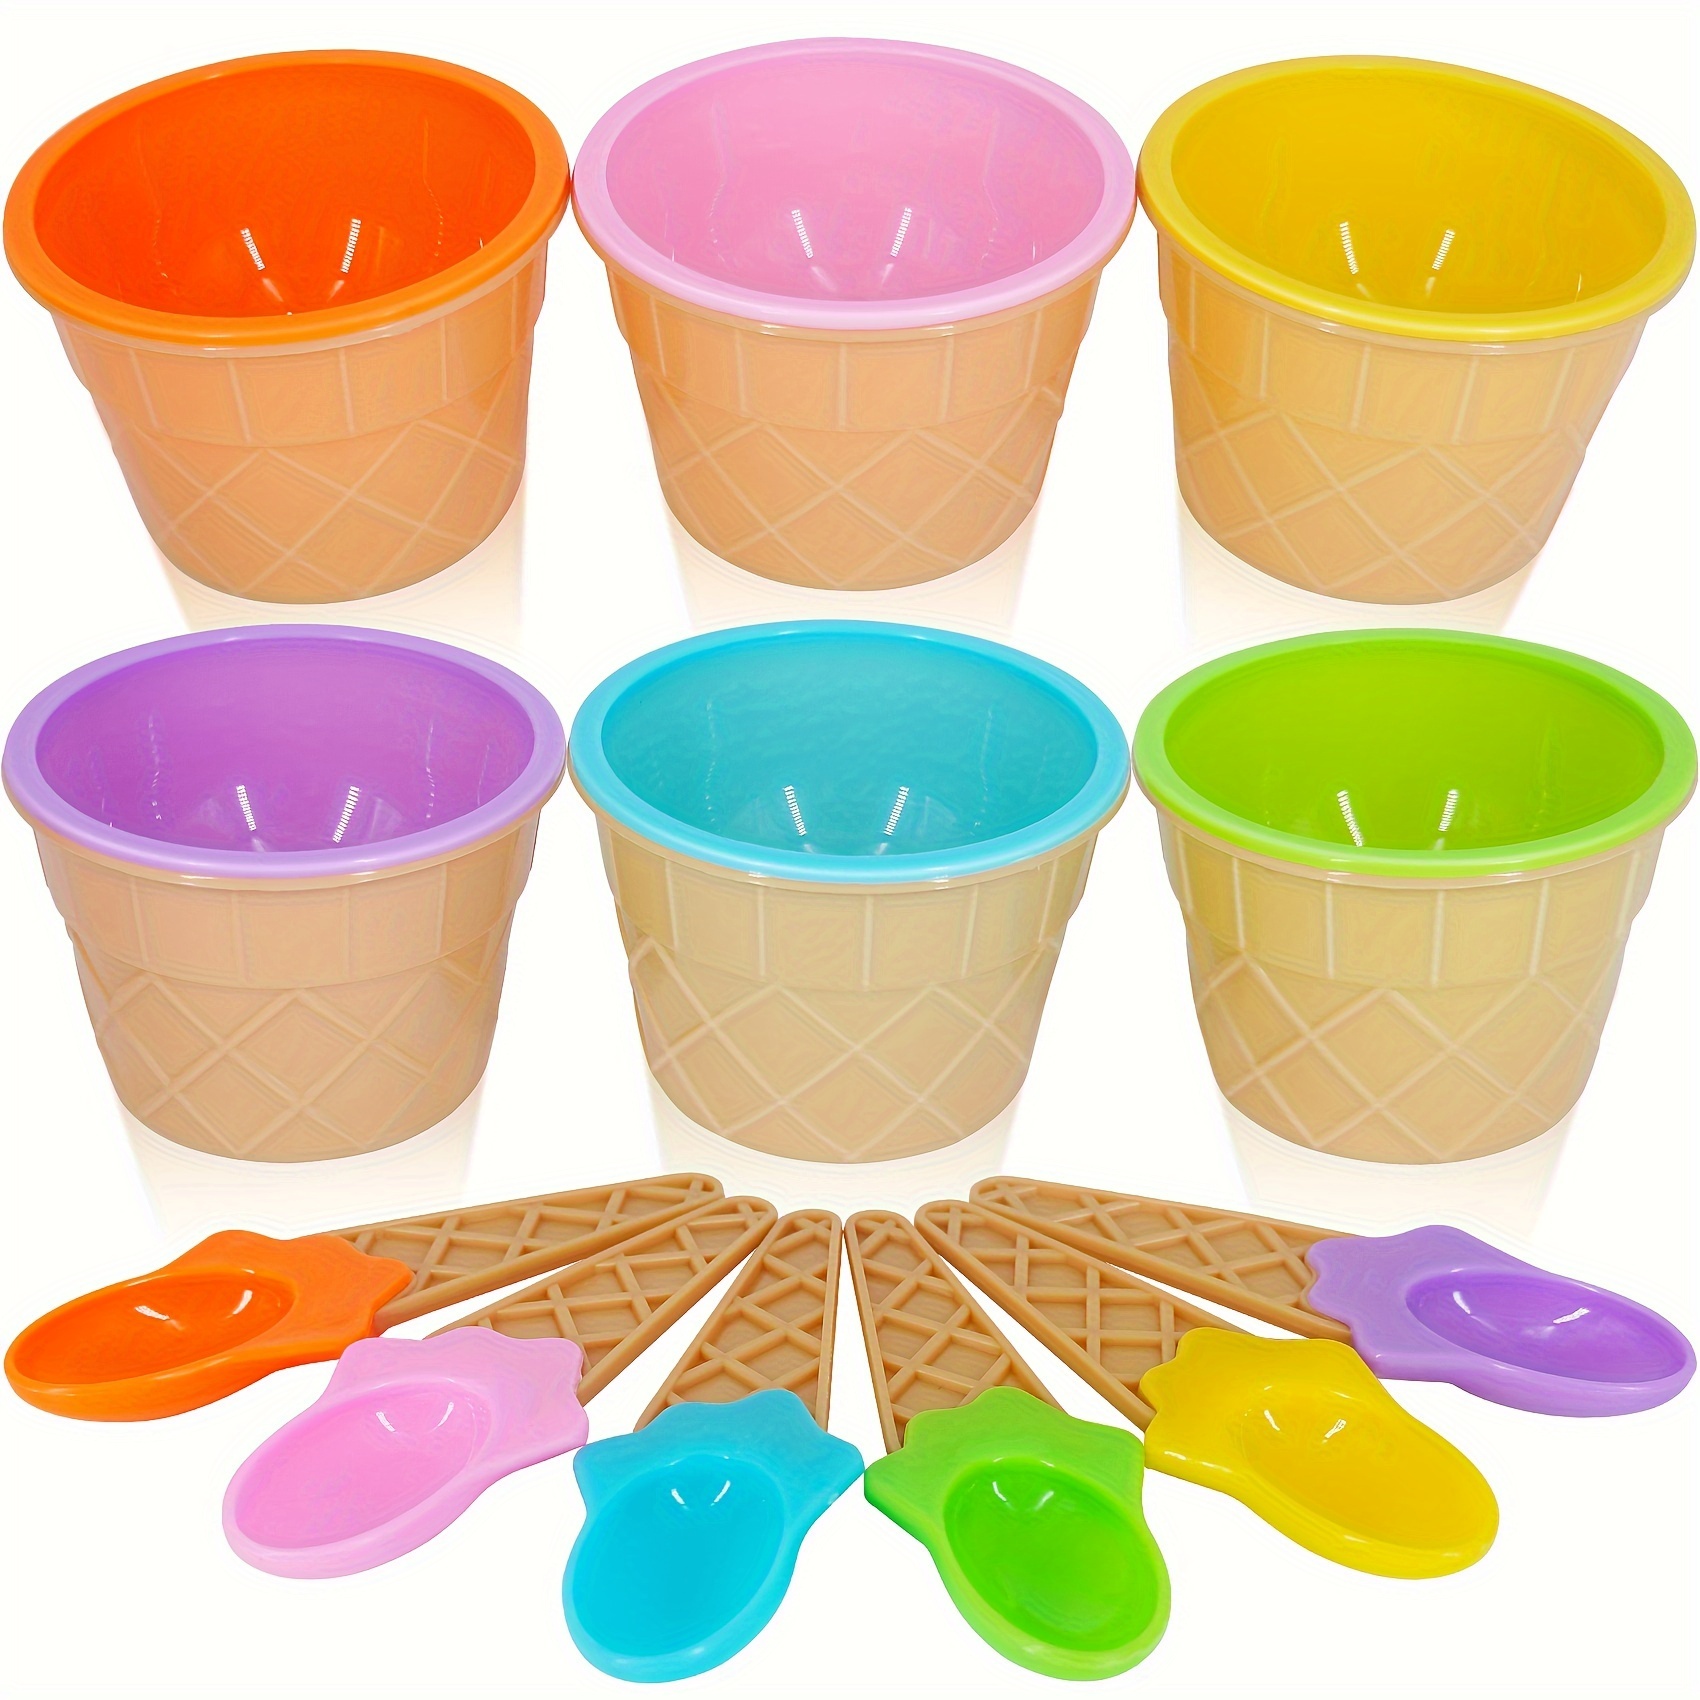 

6 Pieces Ice Cream Bowl And Spoon, Cartoon Candy Colorful Ice Cream Bowl Kids Set, Reusable Plastic Ice Cream Cup, Ice For Restaurants/cafe